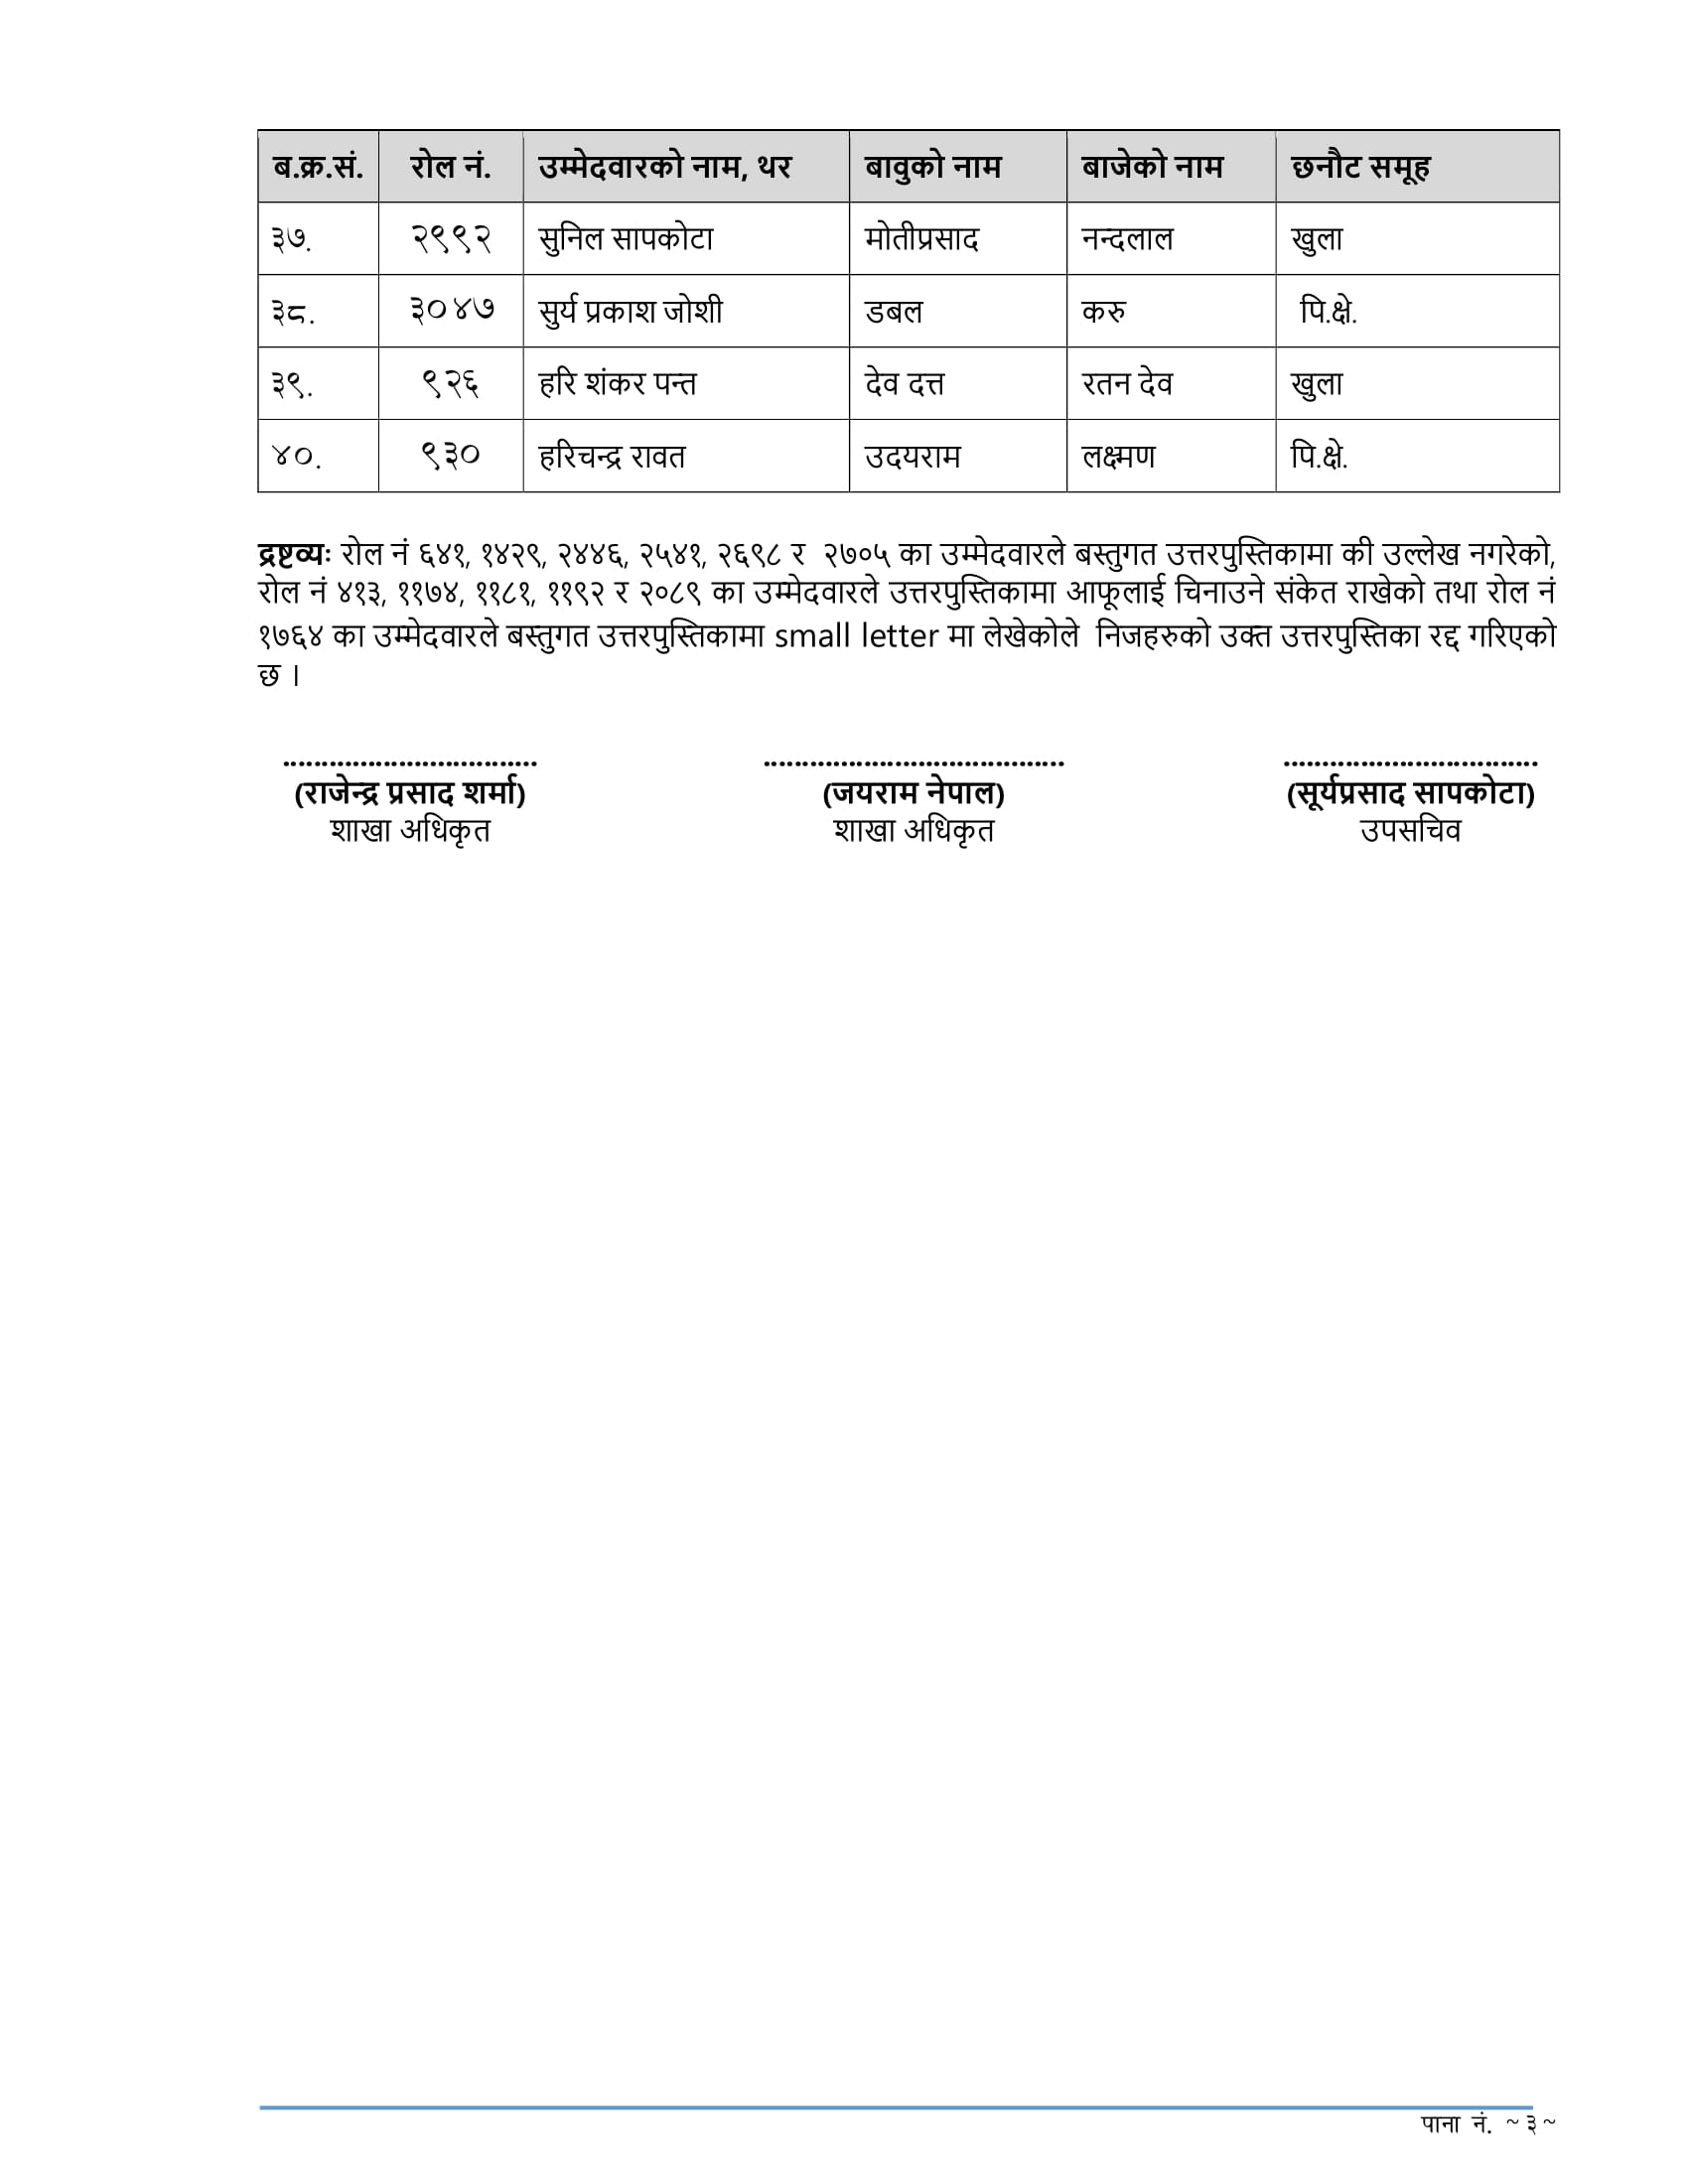 Nepal Bank Limited Written Exam Result